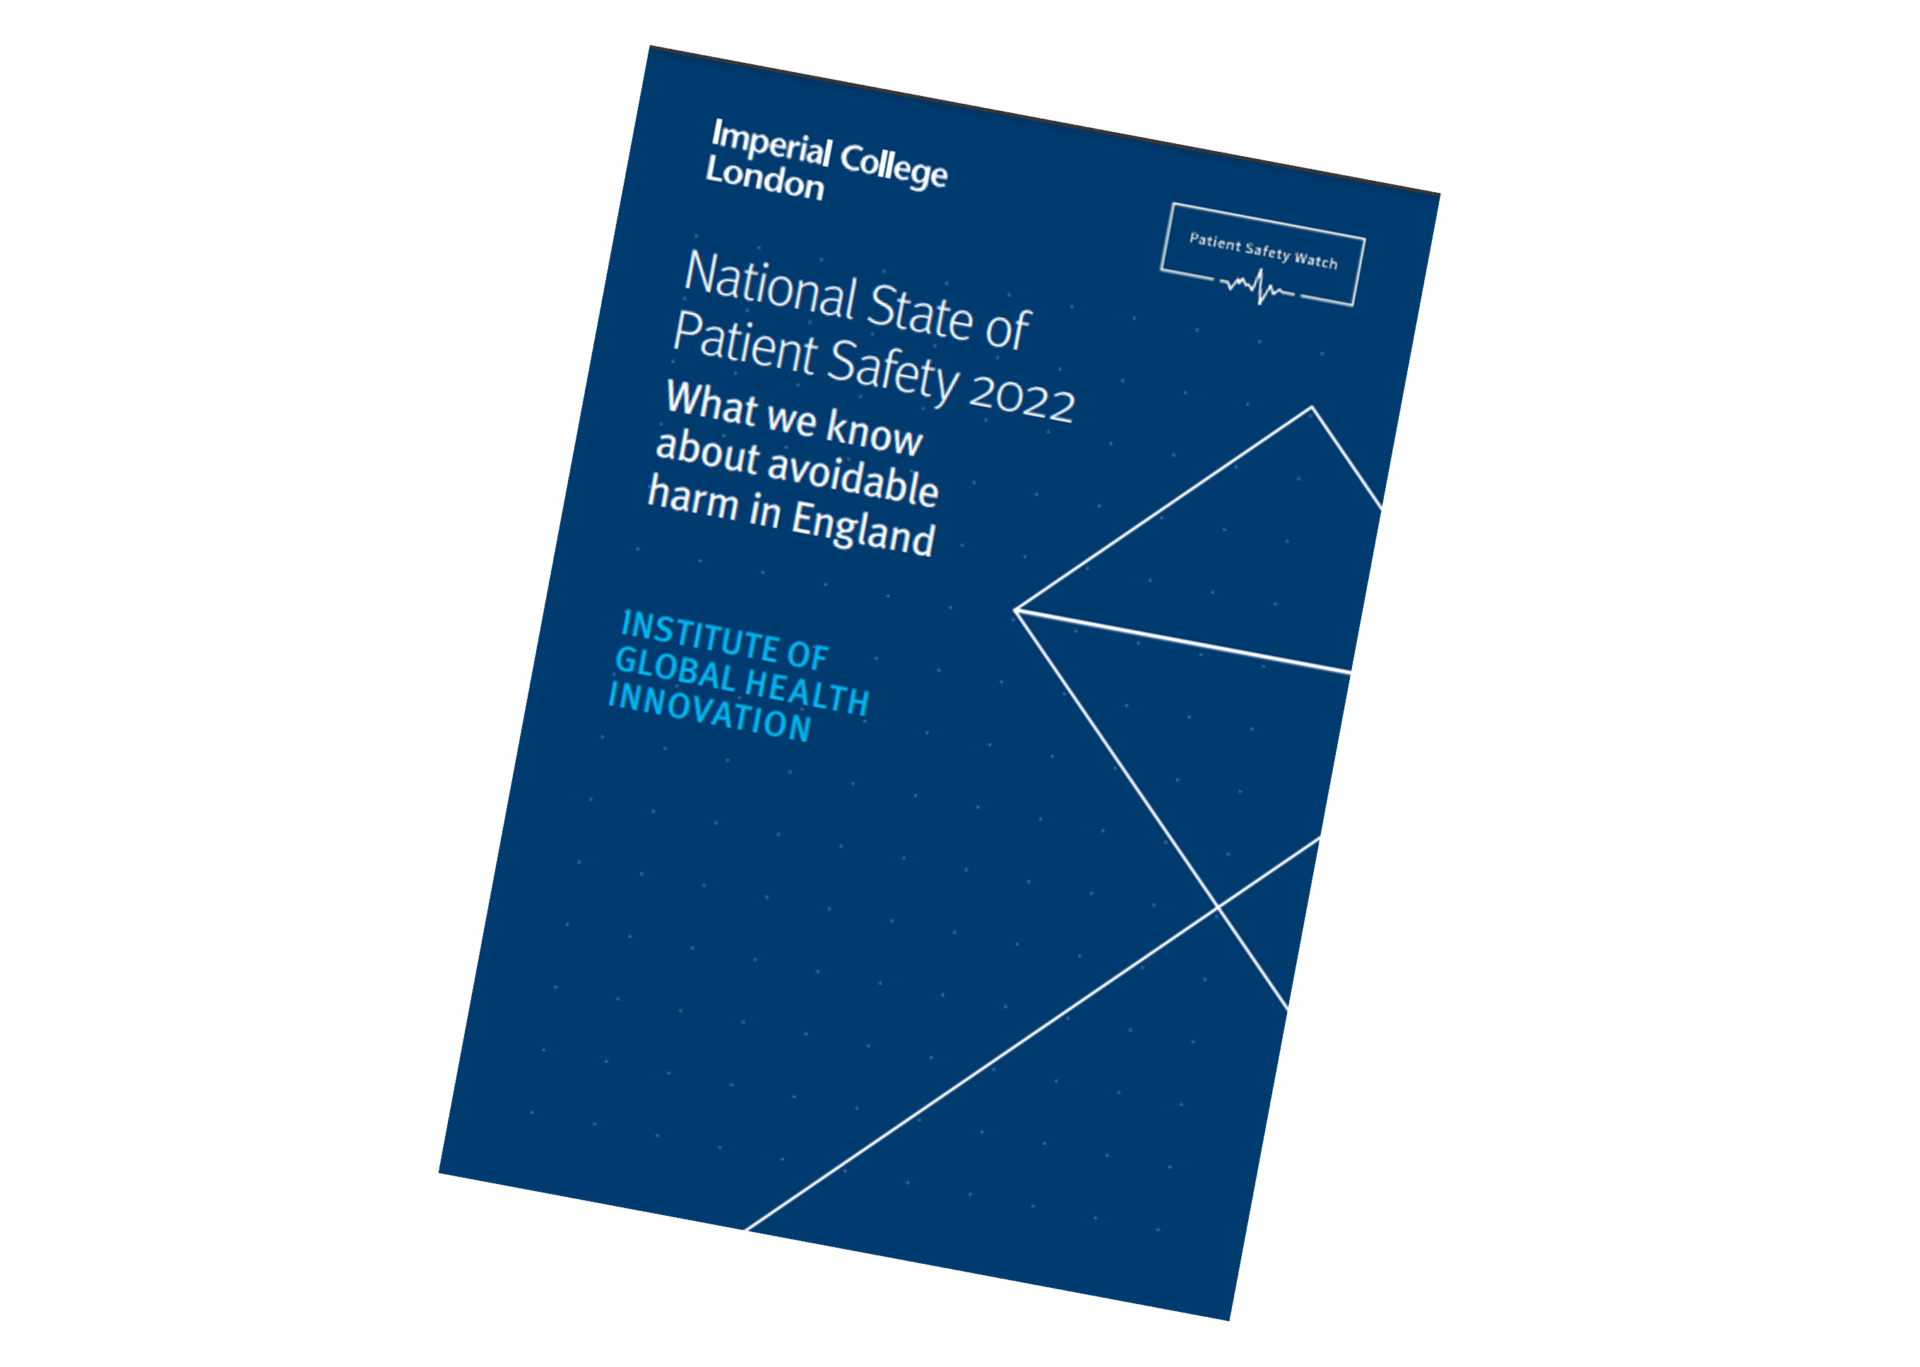 National State of Patient Safety 2022: What we know about avoidable harm in England